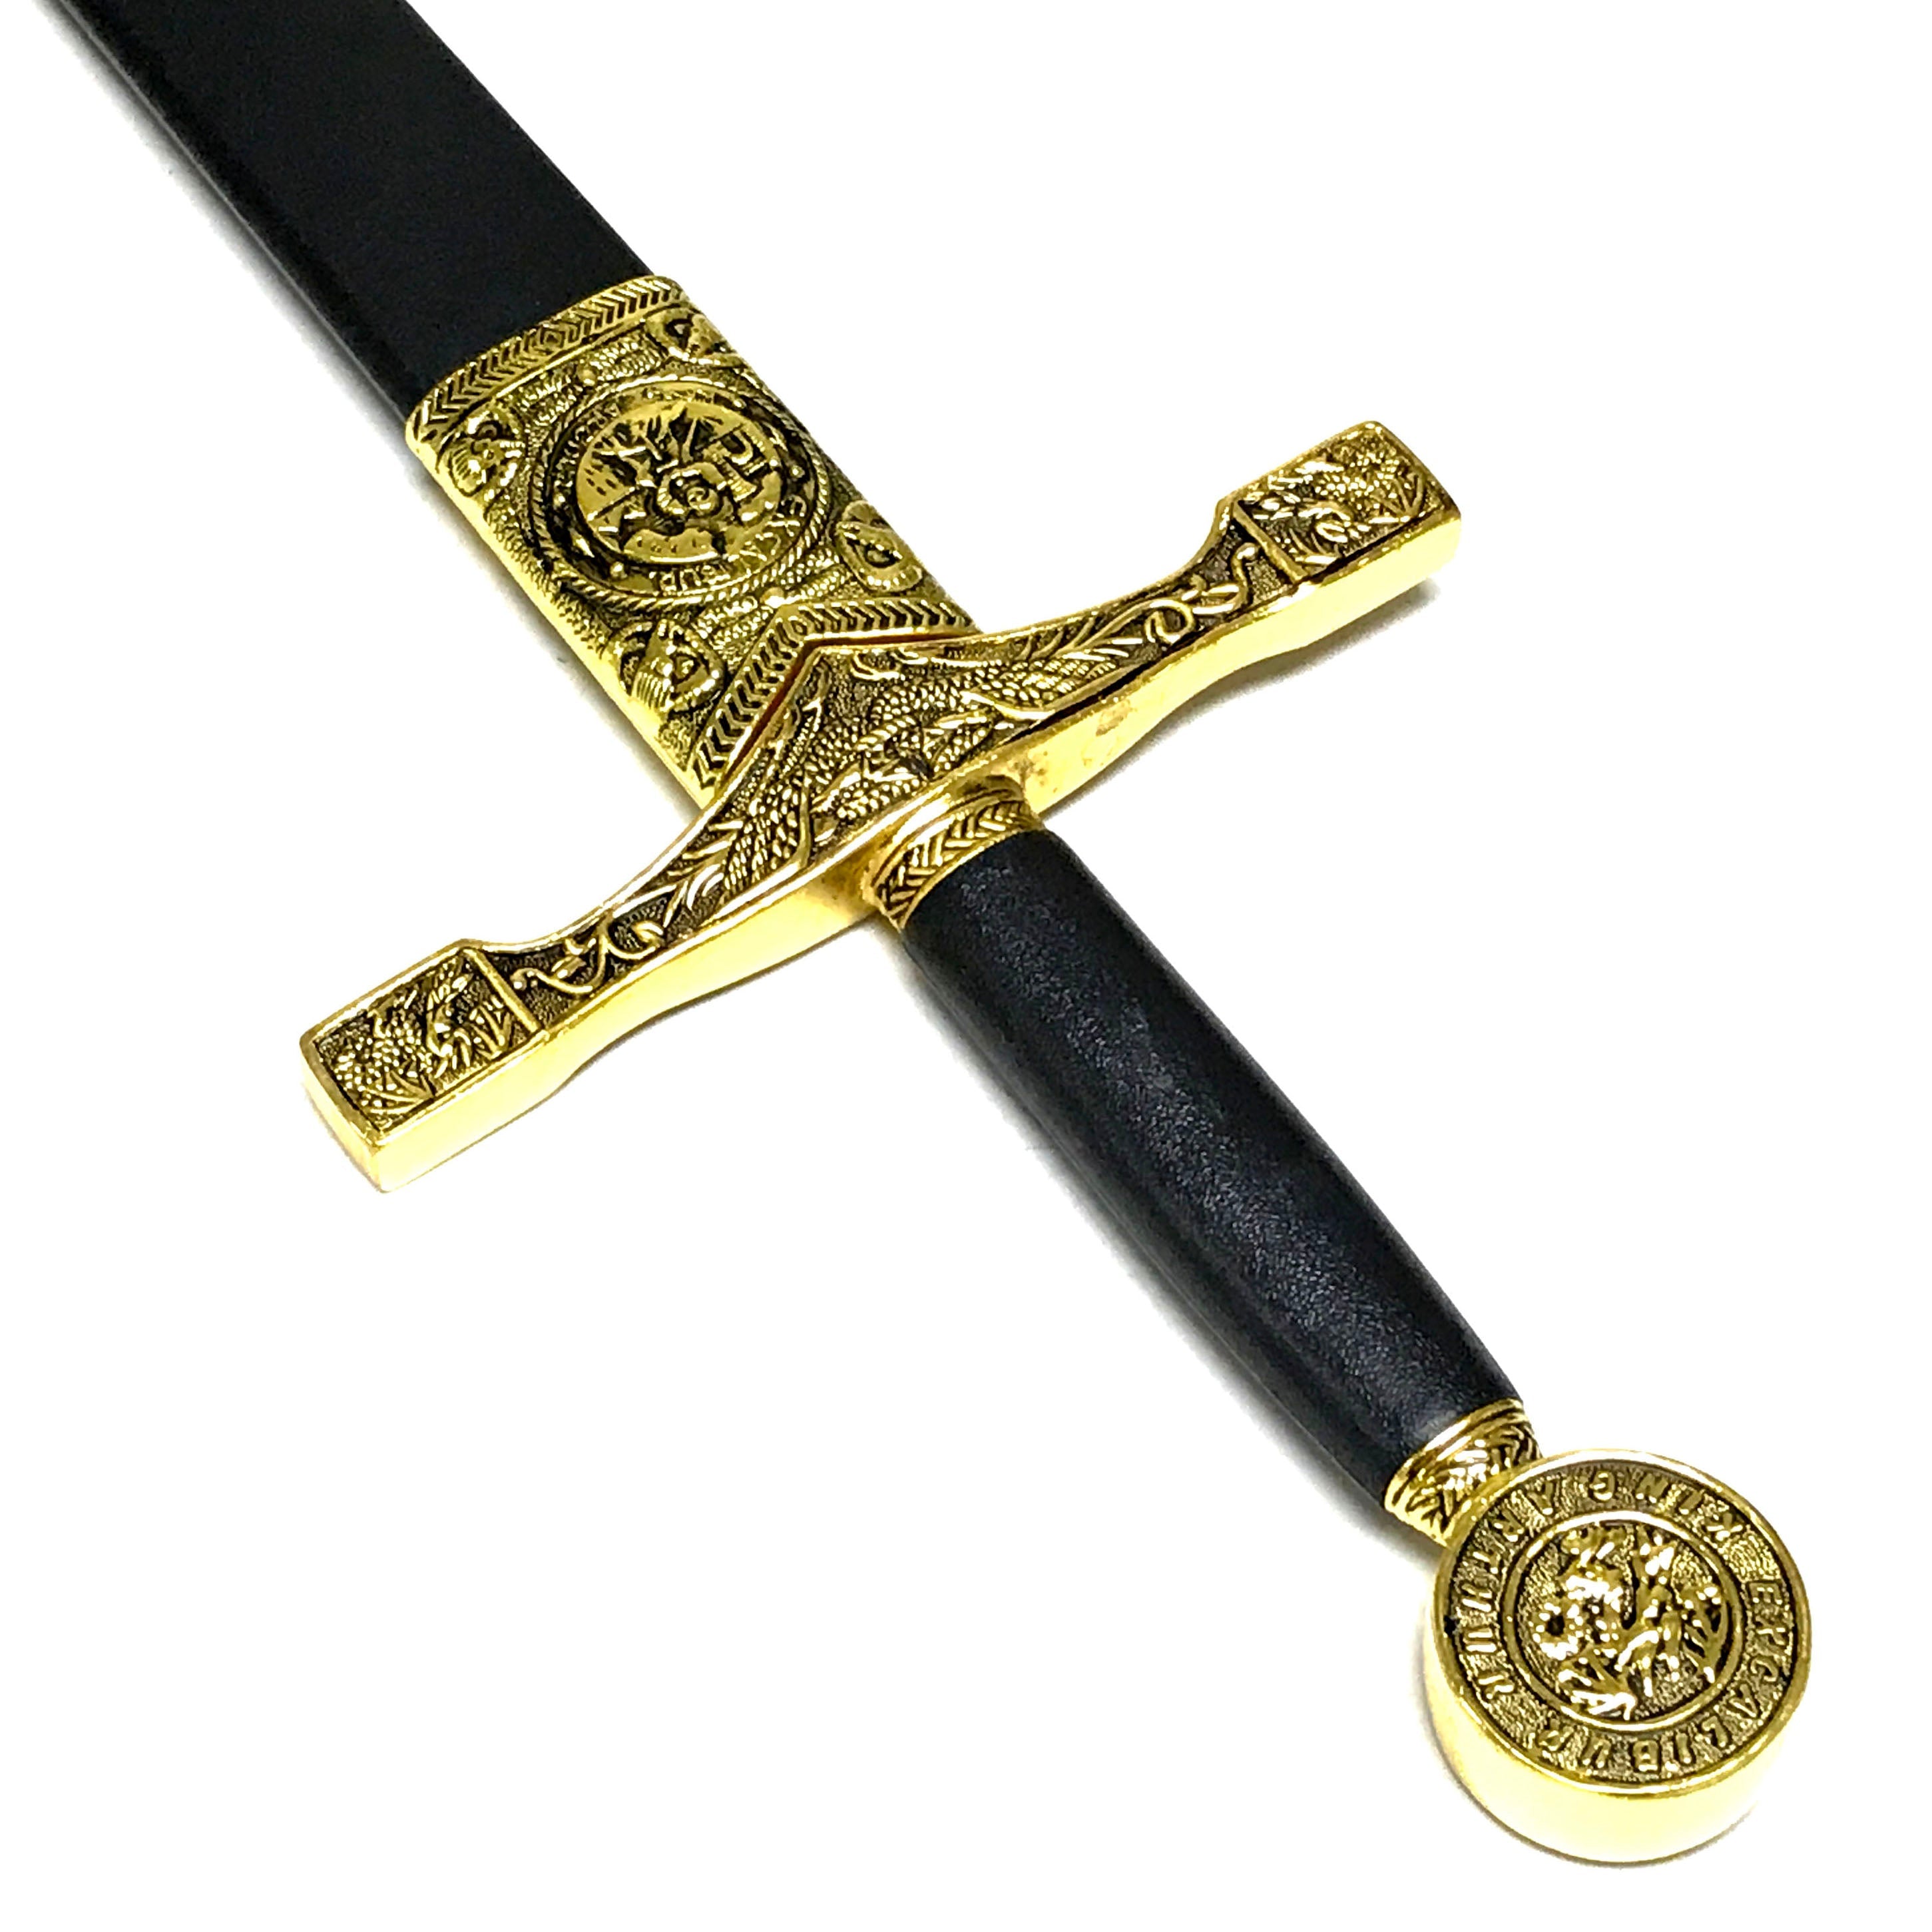 Gold and Silver King Arthur Knight's of the Round Table Excalibur Metal Replica Sword with Scabbard